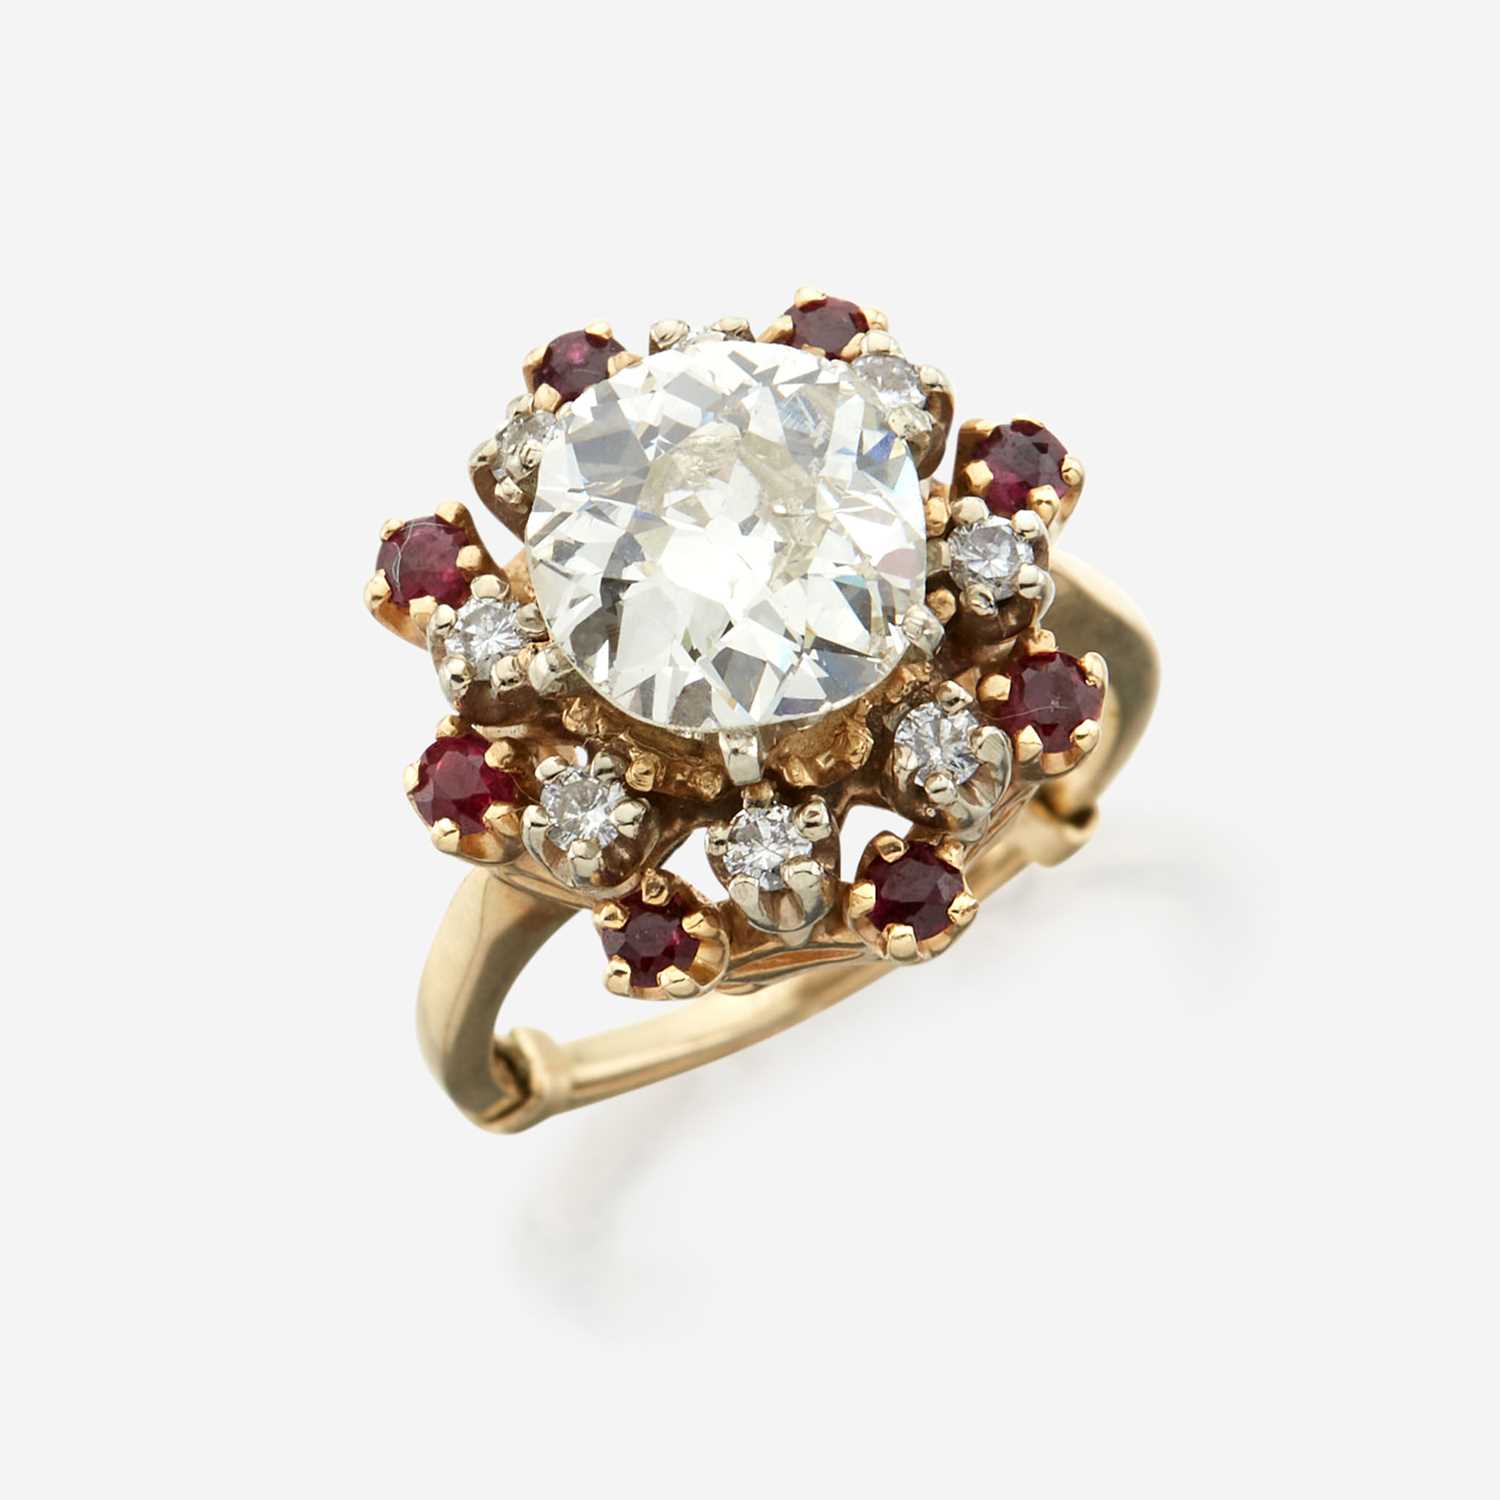 Lot 55 - A diamond, ruby, and gold ring